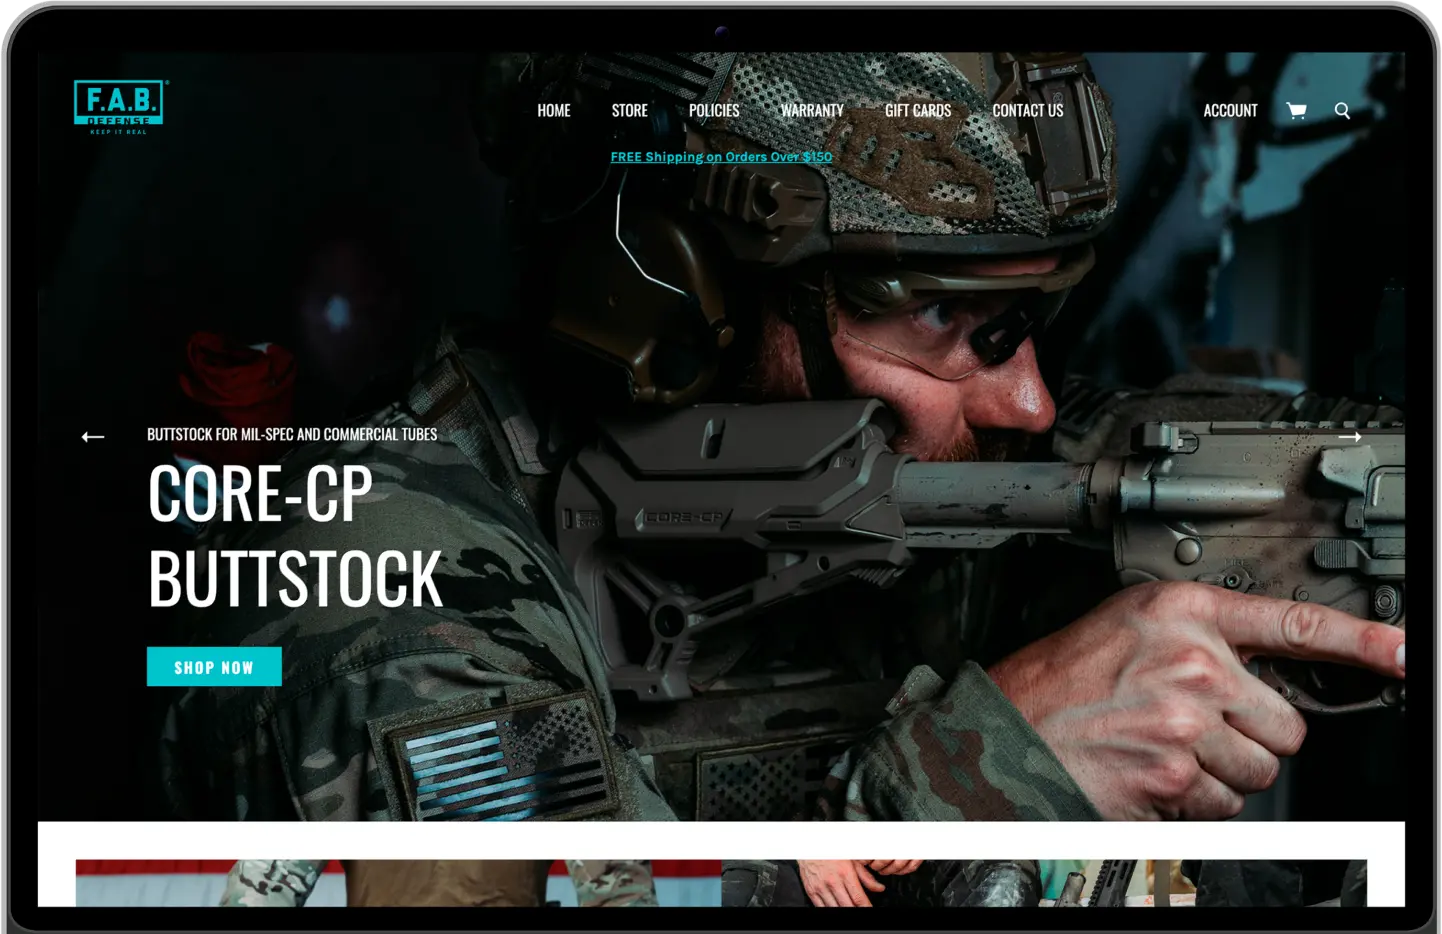 A cutting-edge tactical equipment and weapon accessories manufacturer recognized the need to upgrade their website to better align with their internal business needs. The company has a wide variety of goods with unique SKU numbers.